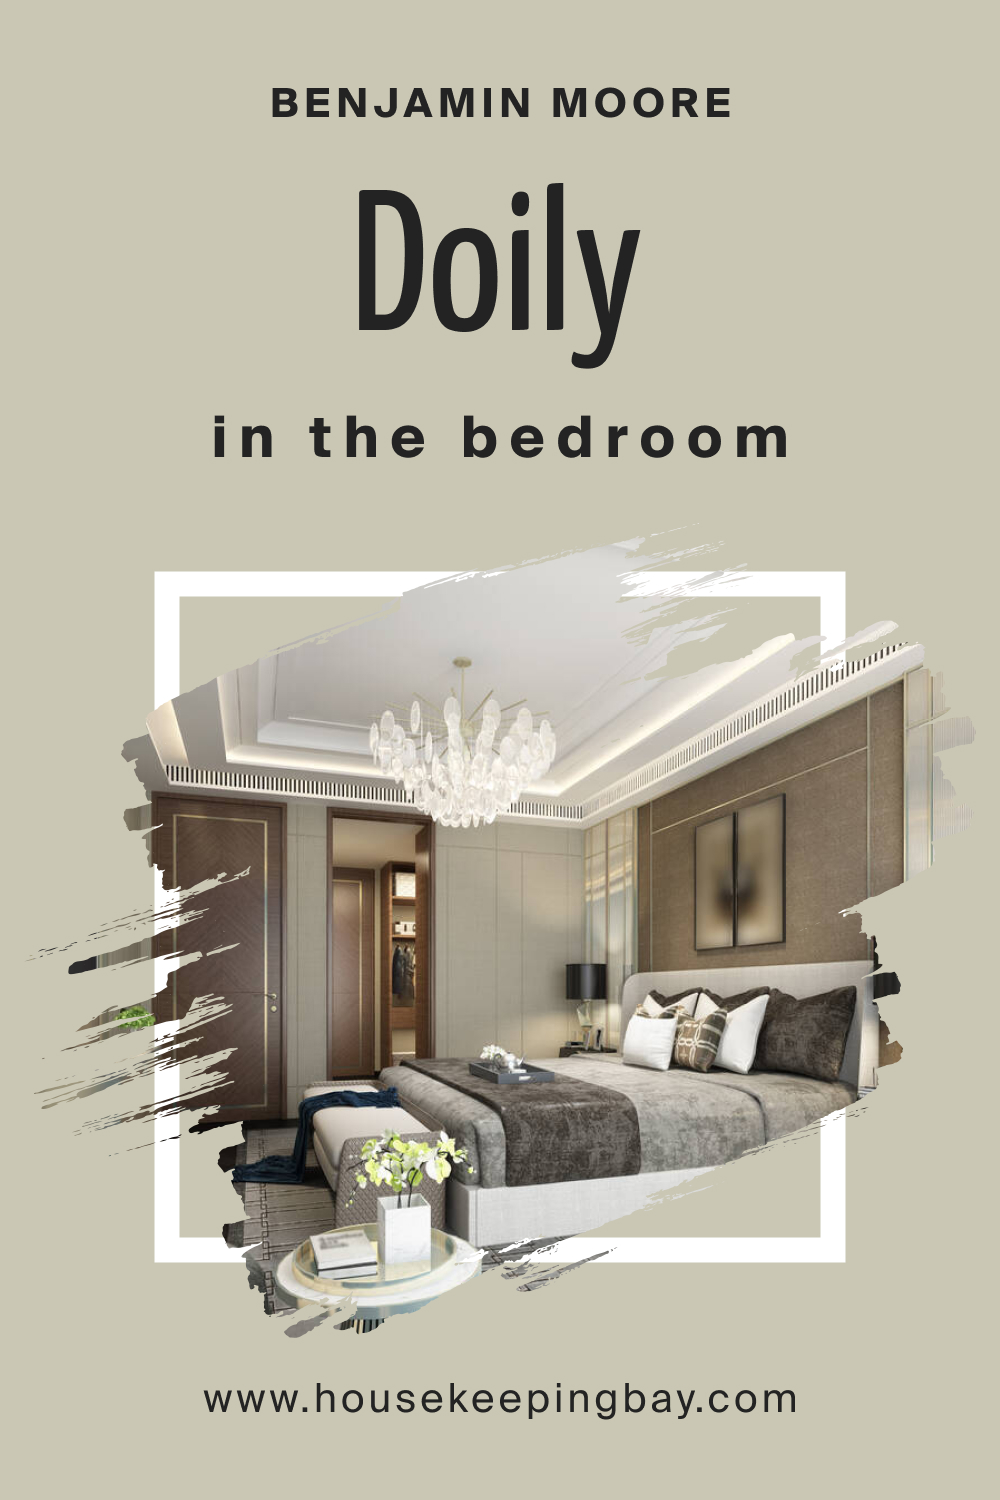 How to Use BM Doily CSP-130 in the Bedroom?